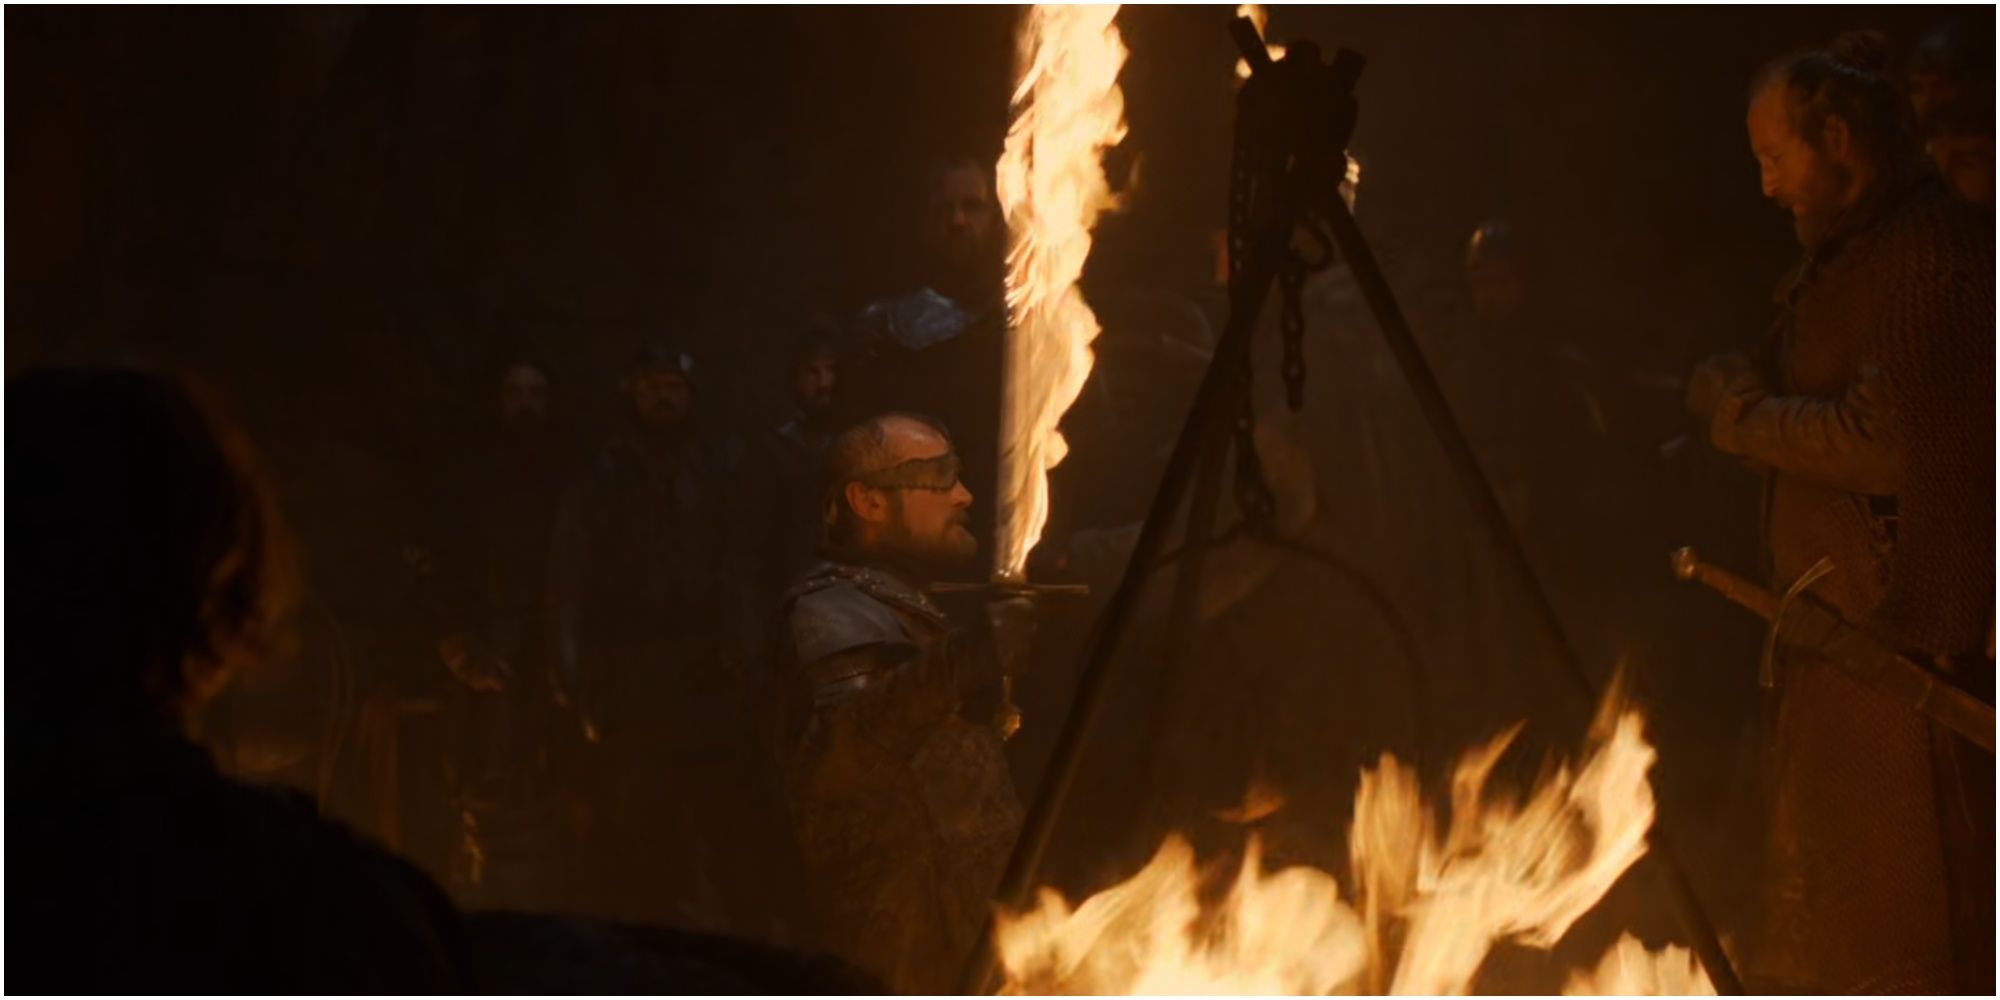 Beric Dondarrion ignites his sword in Game of Thrones.